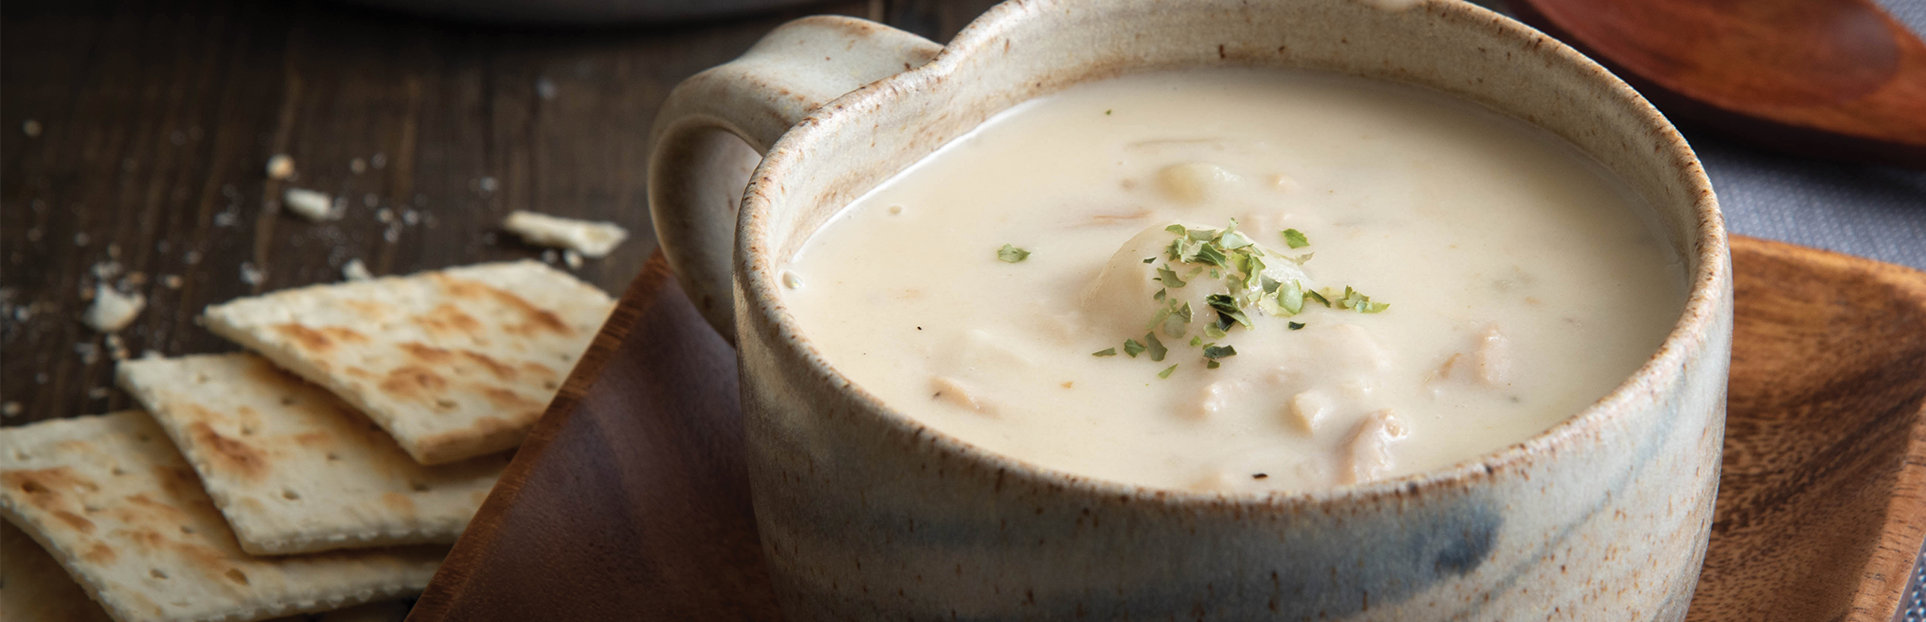 an image of seafood chowder